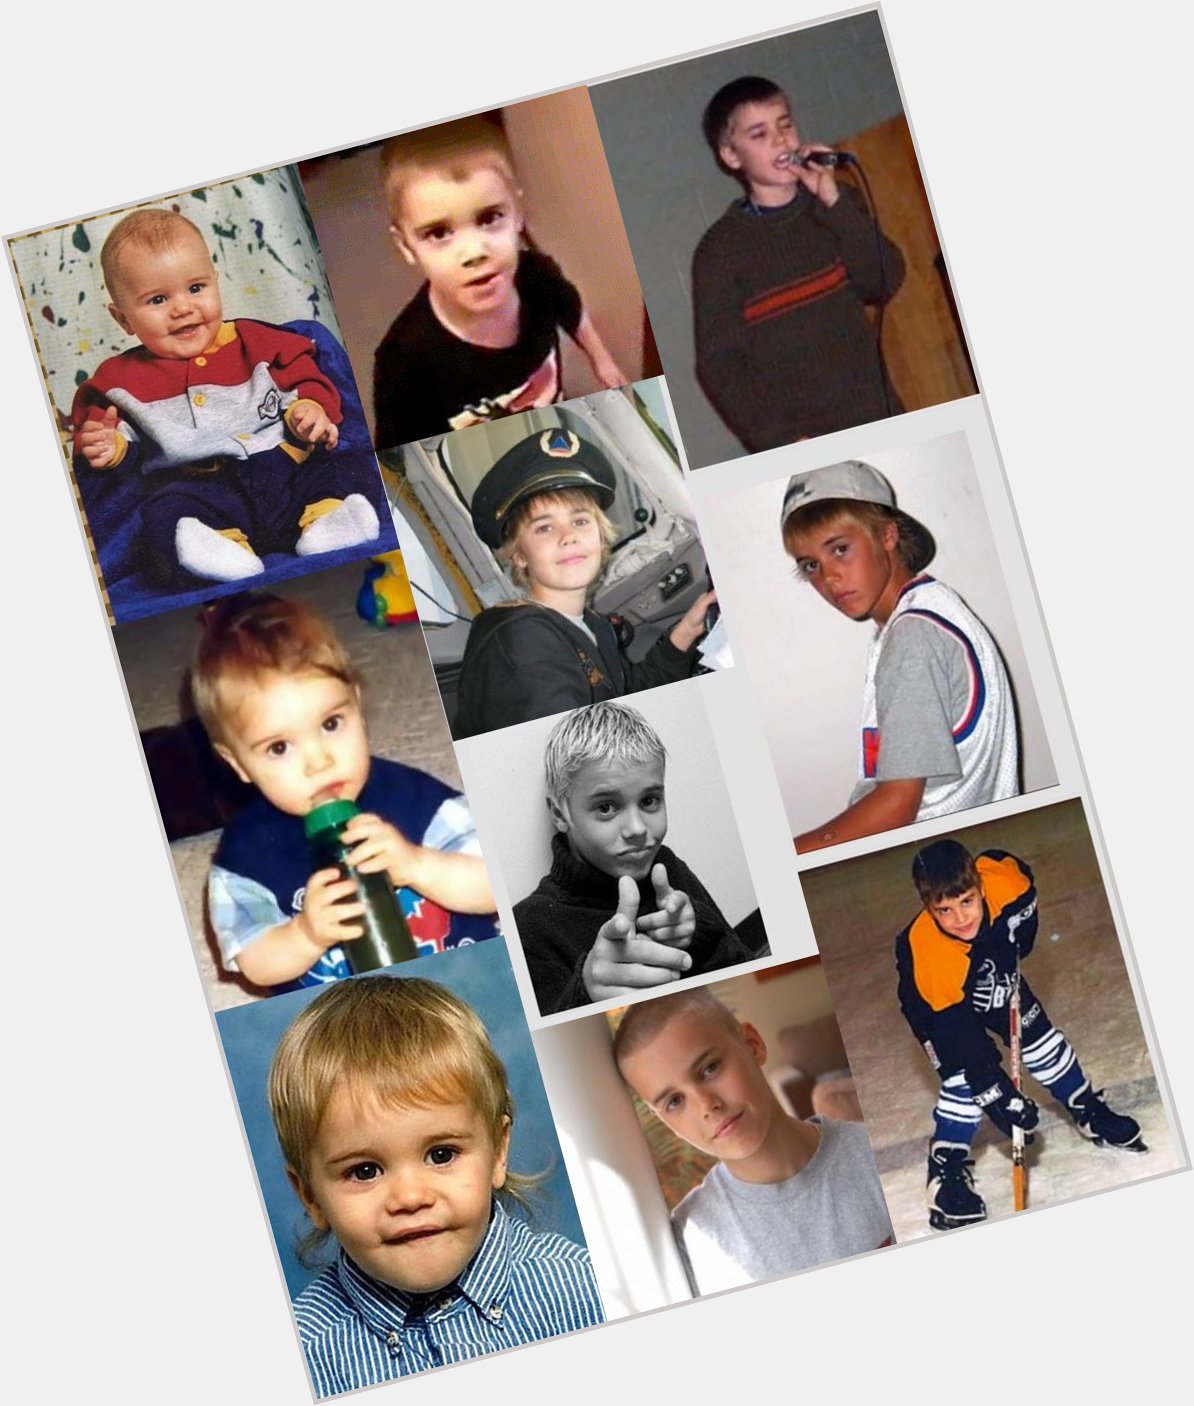 Happy birthday Justin Bieber so happy and be healthy.I love you Justin Bieber so much                   